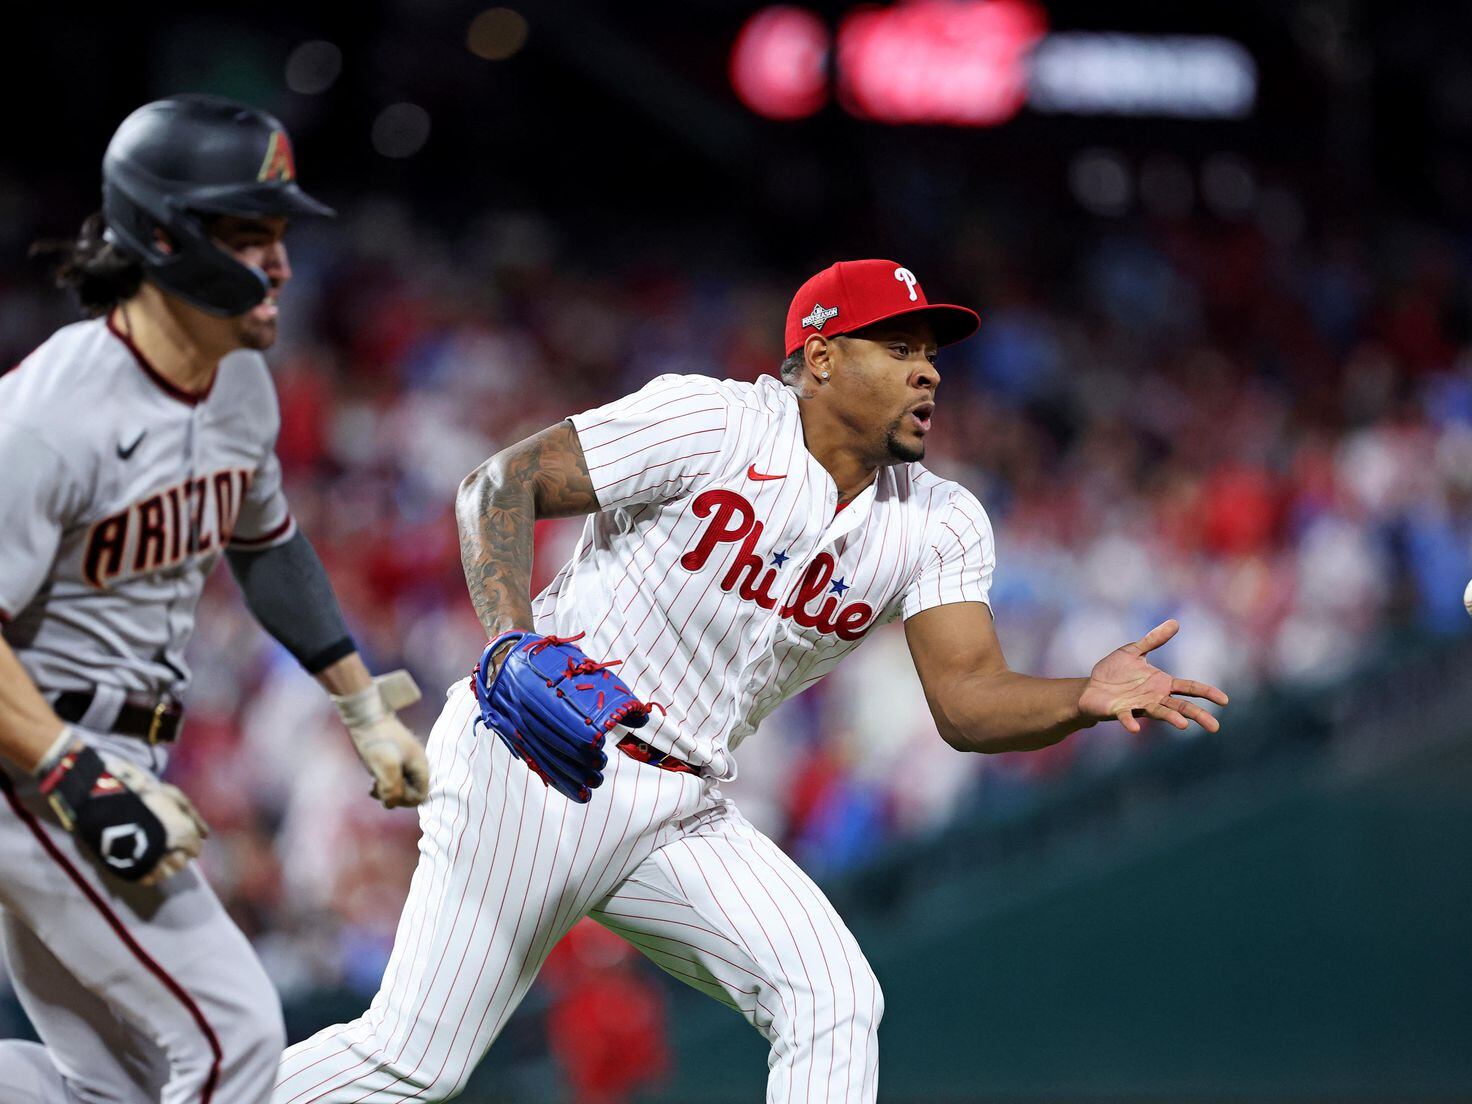 Phillies beat D-backs, one win away from repeat NLCS